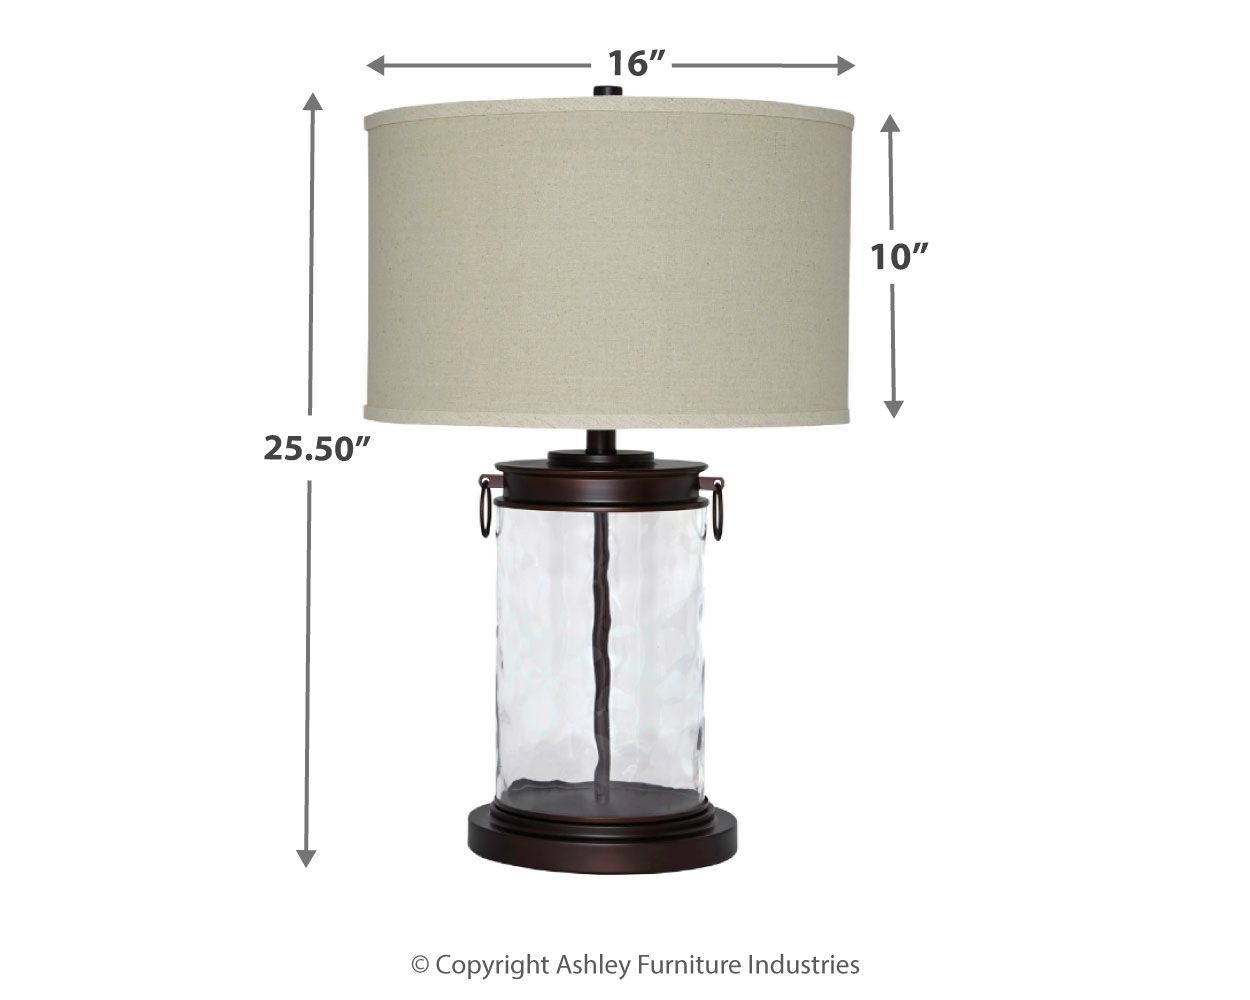 Tailynn  Clear / Bronze Finish - Glass Table Lamp